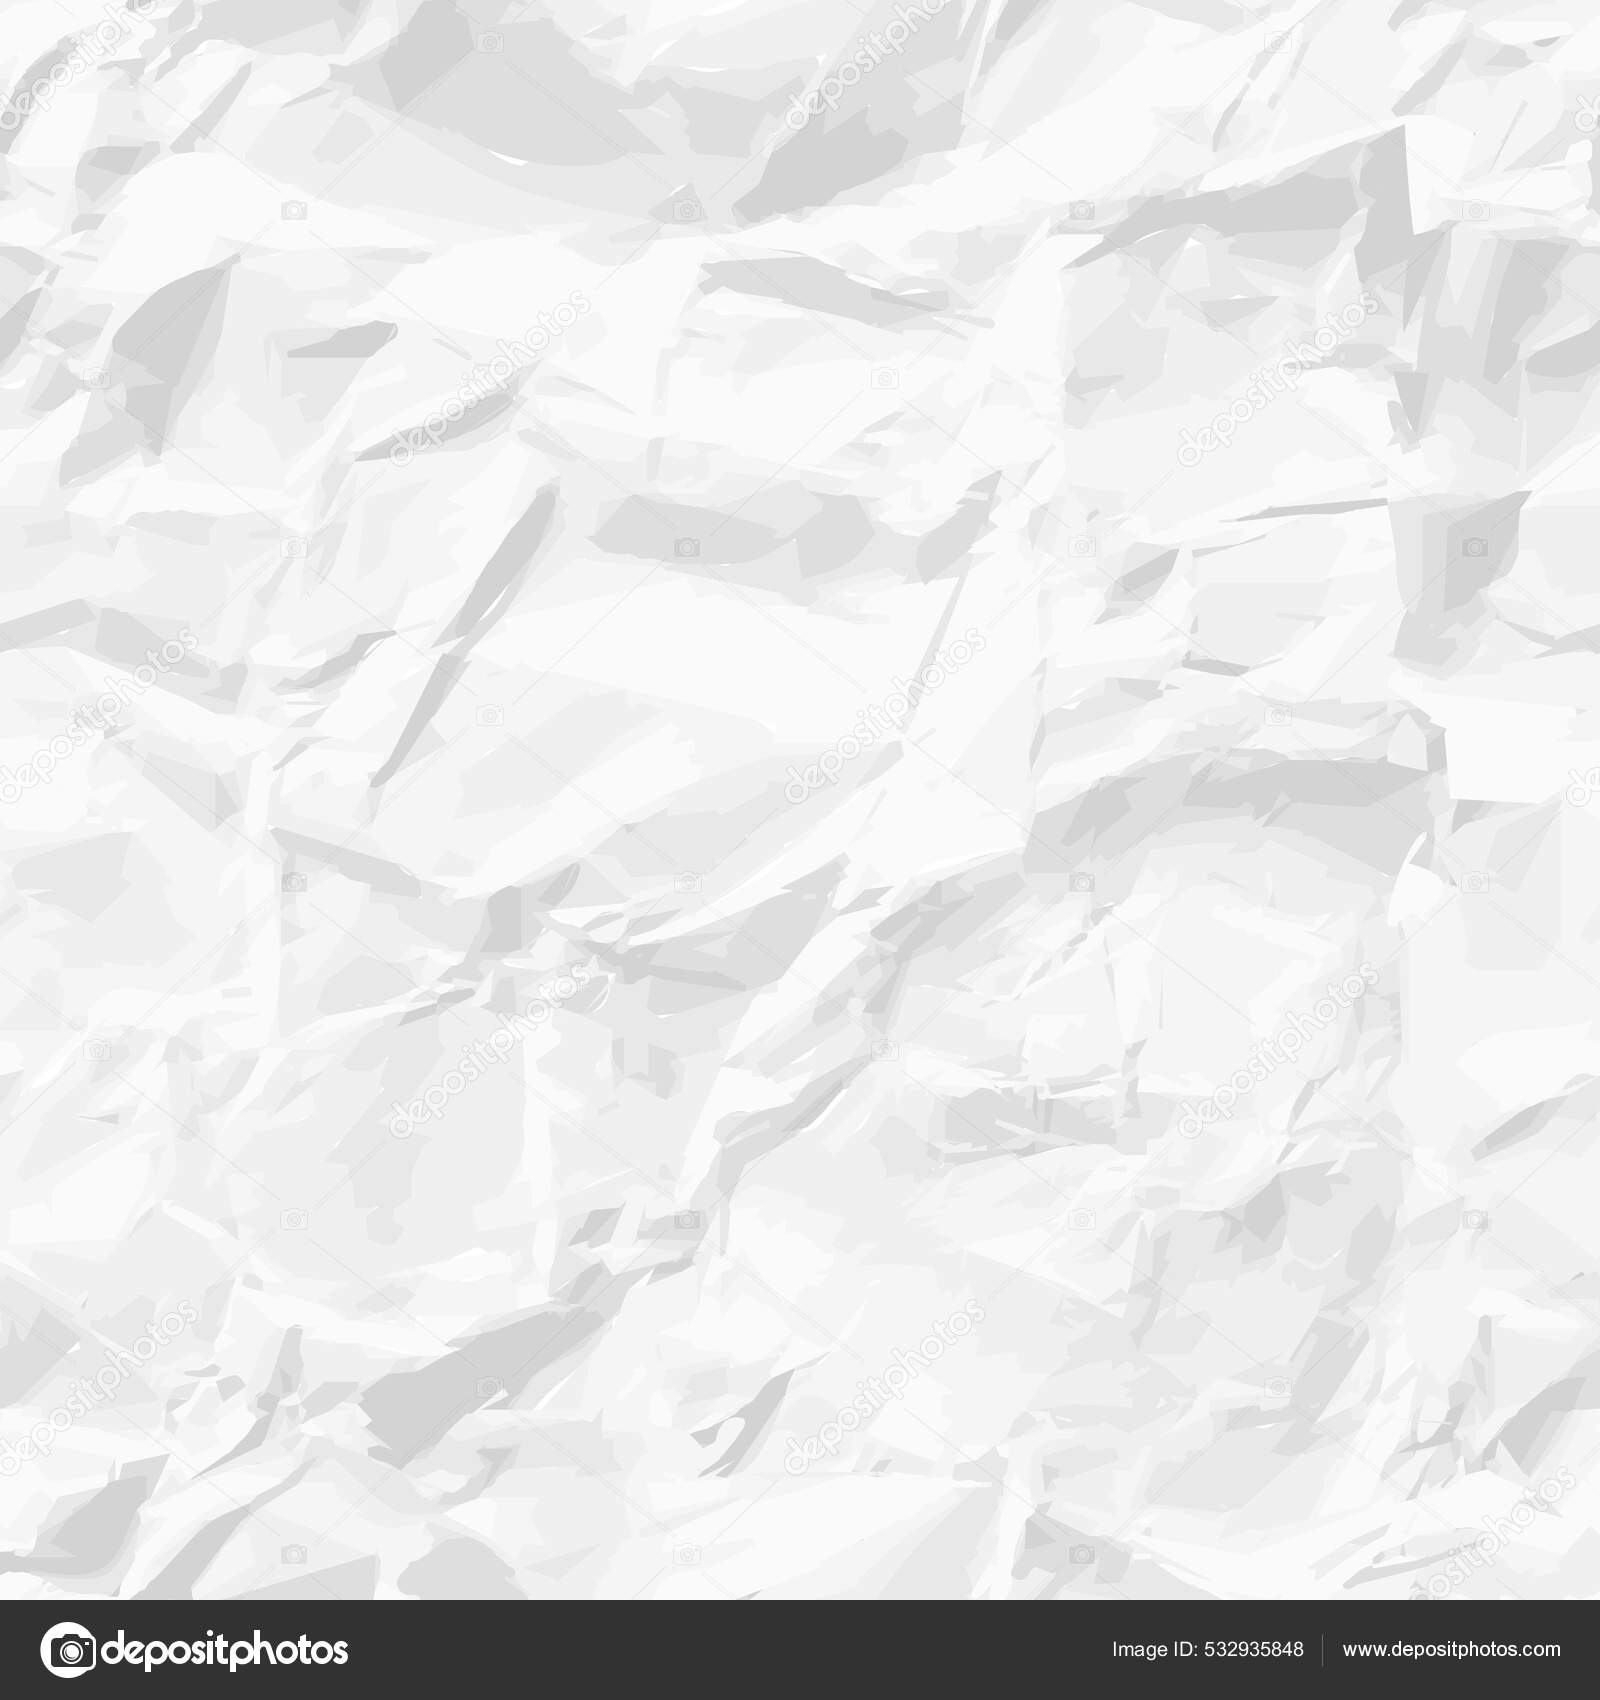 Paper sheet texture background. Moving crumpled white paper